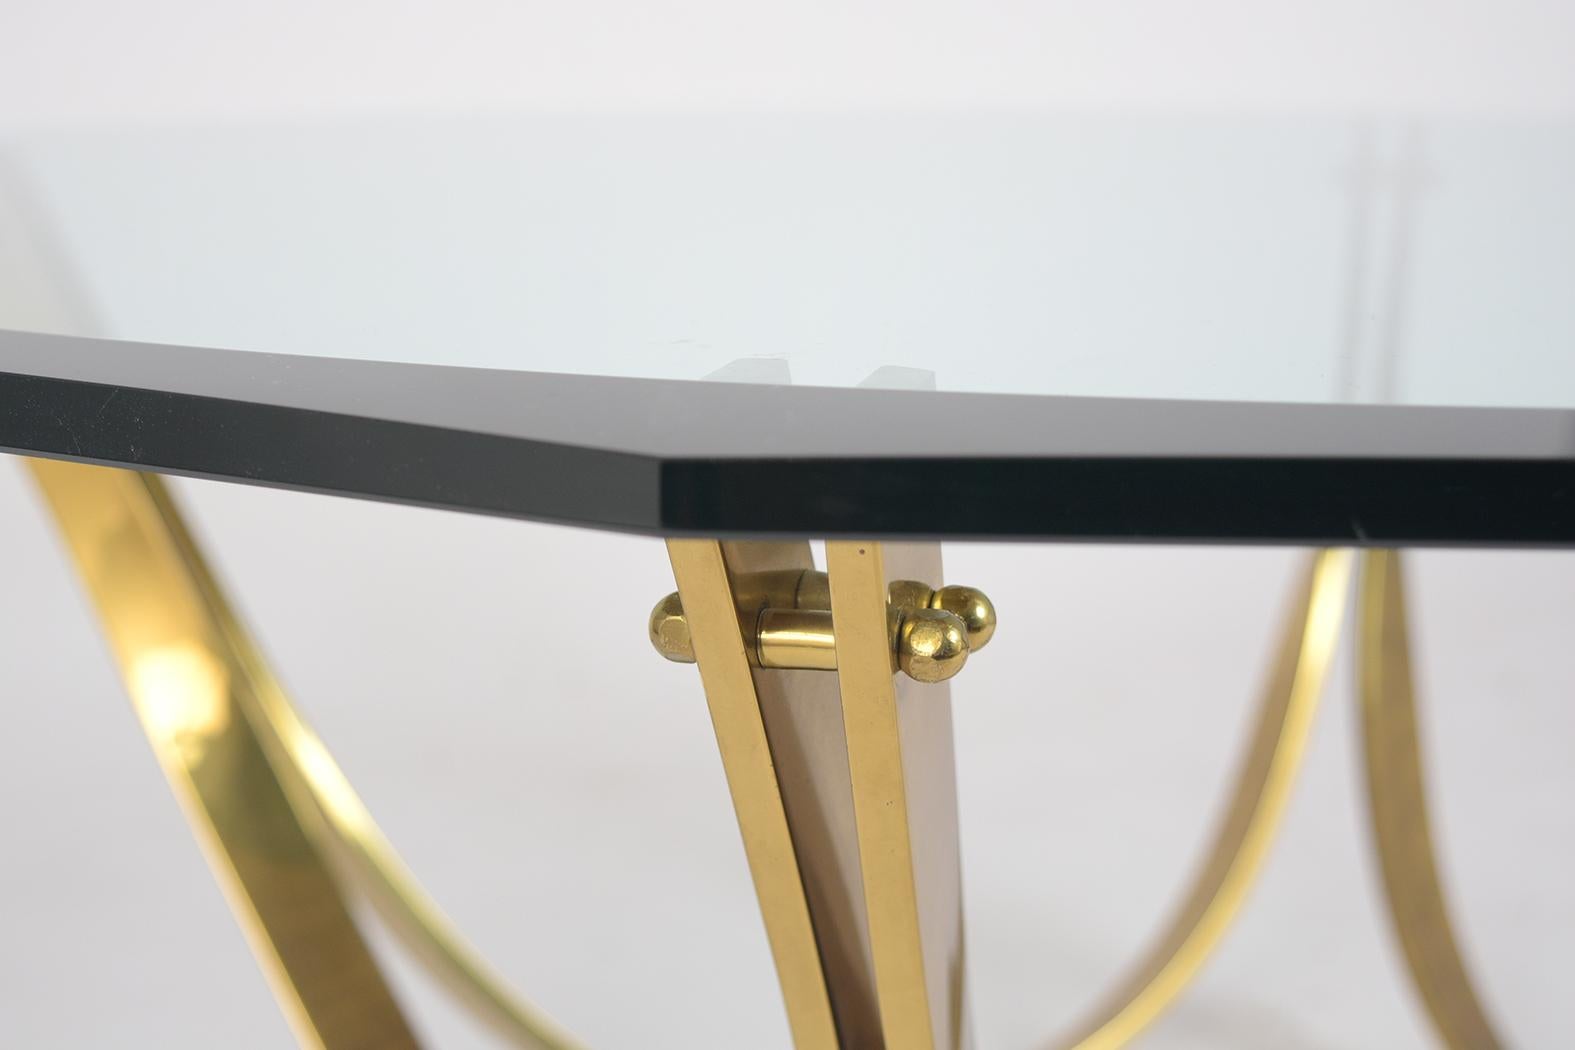 Polished 1960's Brass & Glass Coffee Table by Roger Sprunger Produced by Dunbar